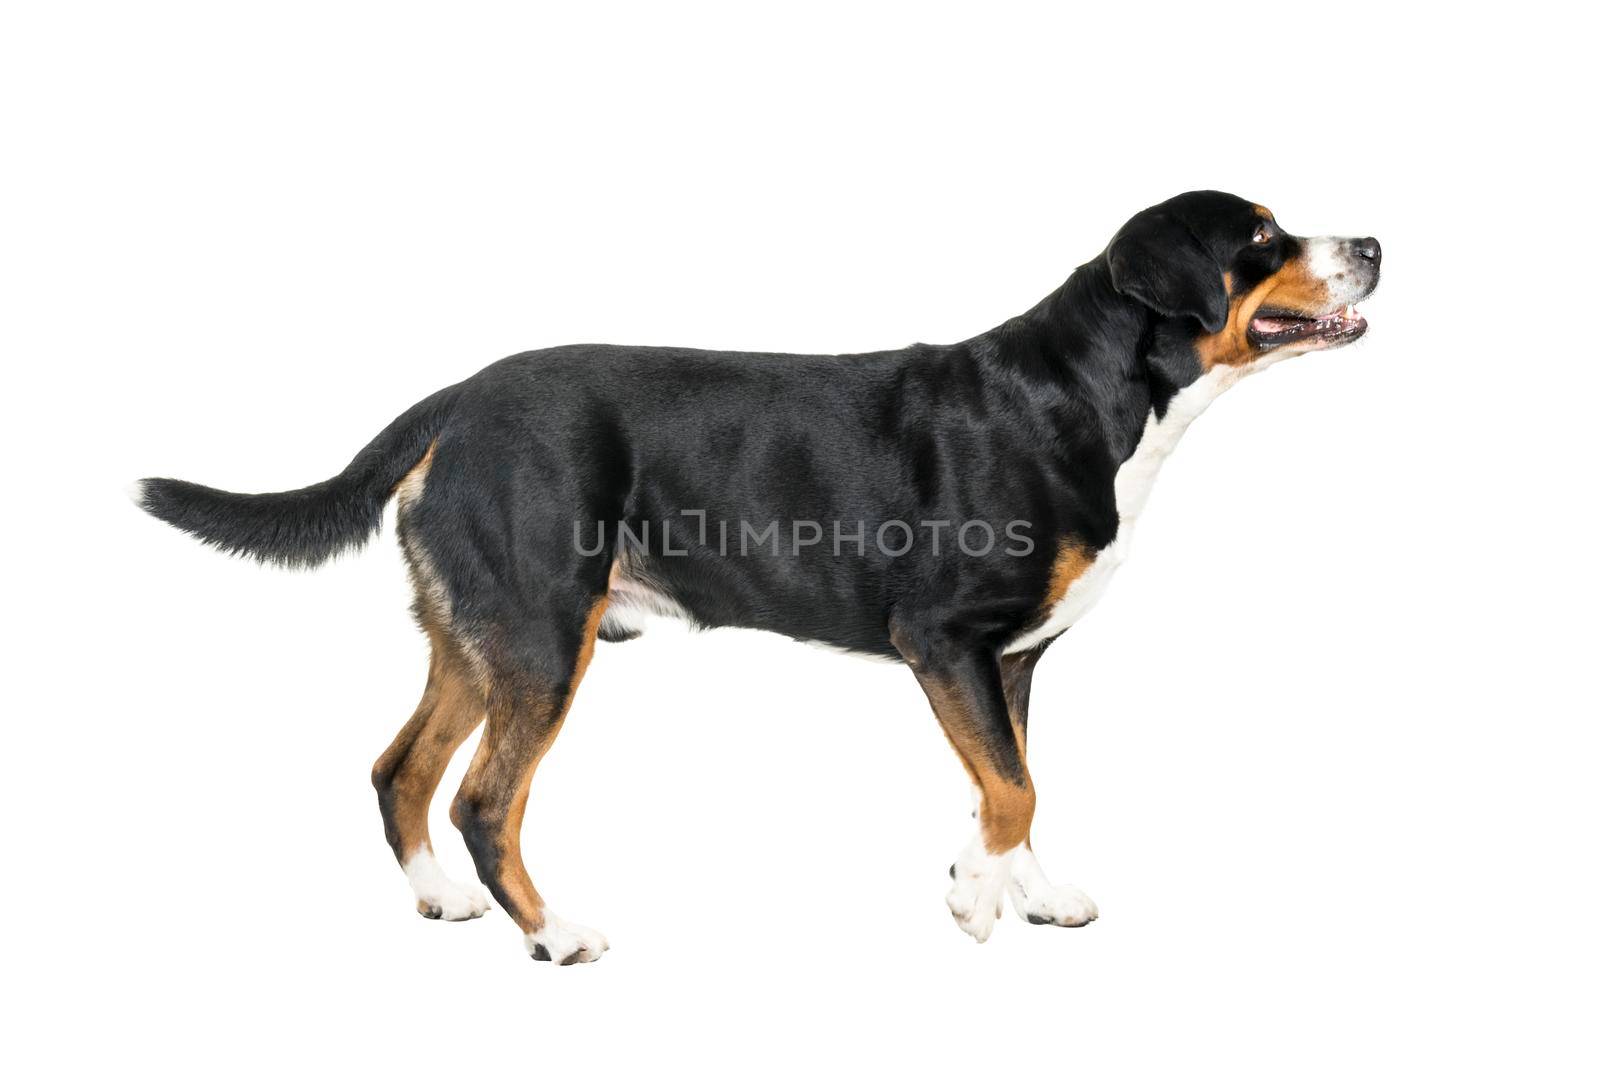 Greater Swiss Mountain Dog standing and looking away from the camera by LeoniekvanderVliet